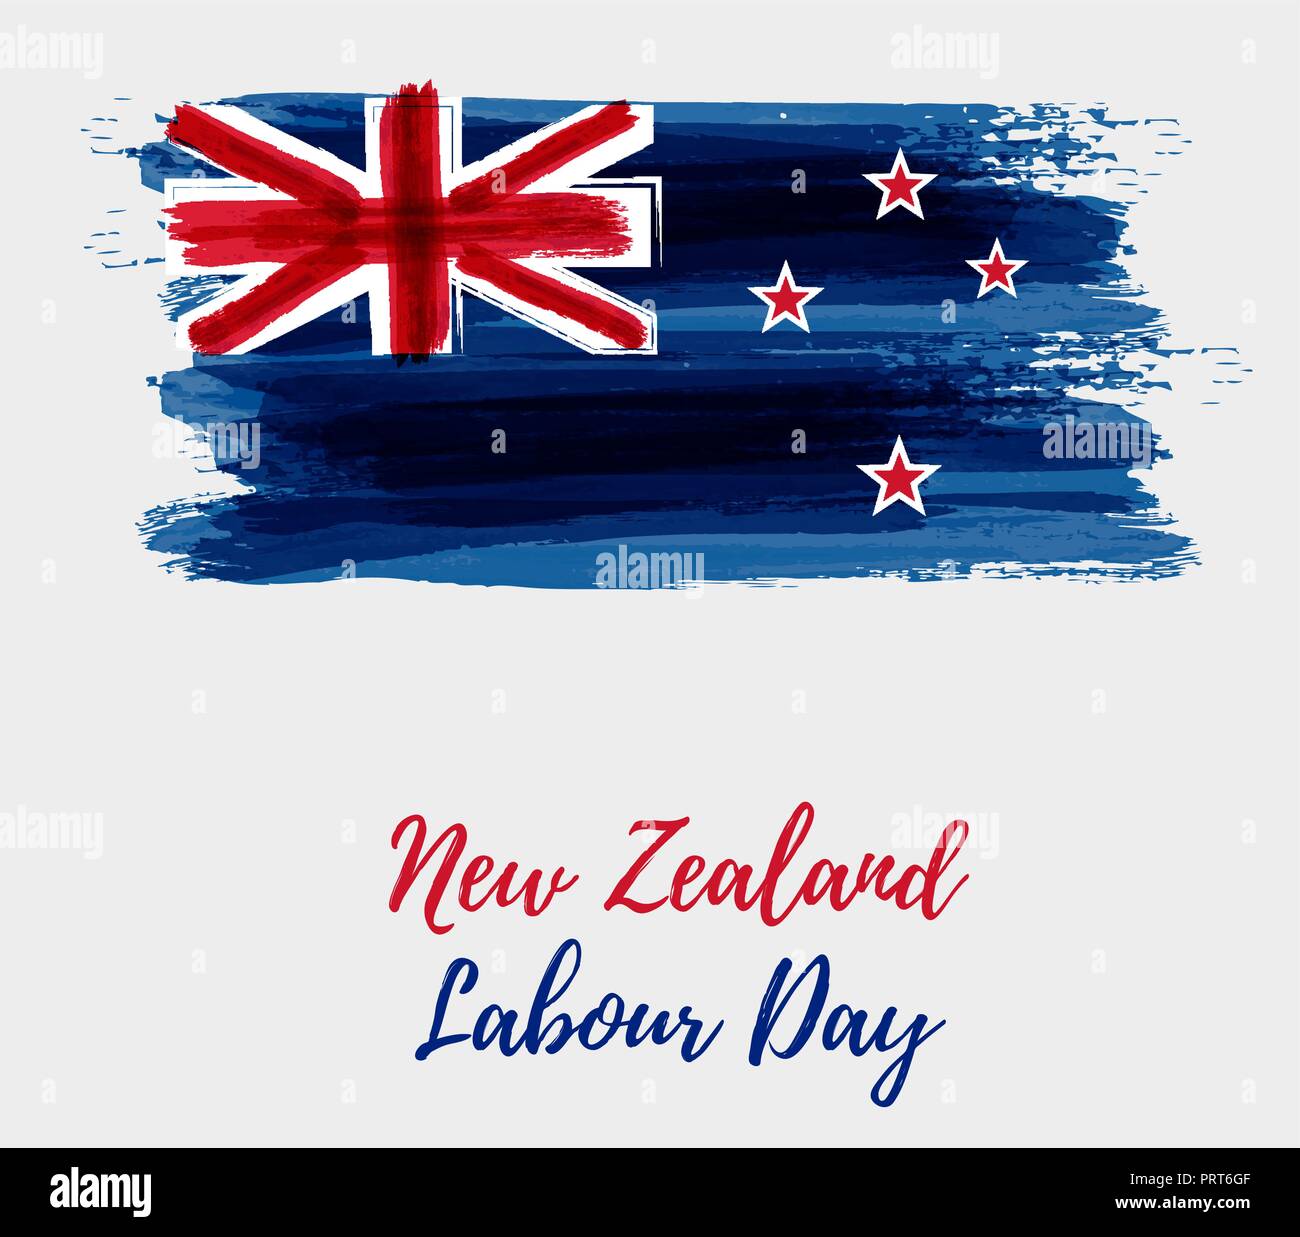 New Zealand Labour Day holiday background. Abstract painted grunge watercolor flag of New Zealand. Template for holiday banner, poster, greeting card, Stock Vector